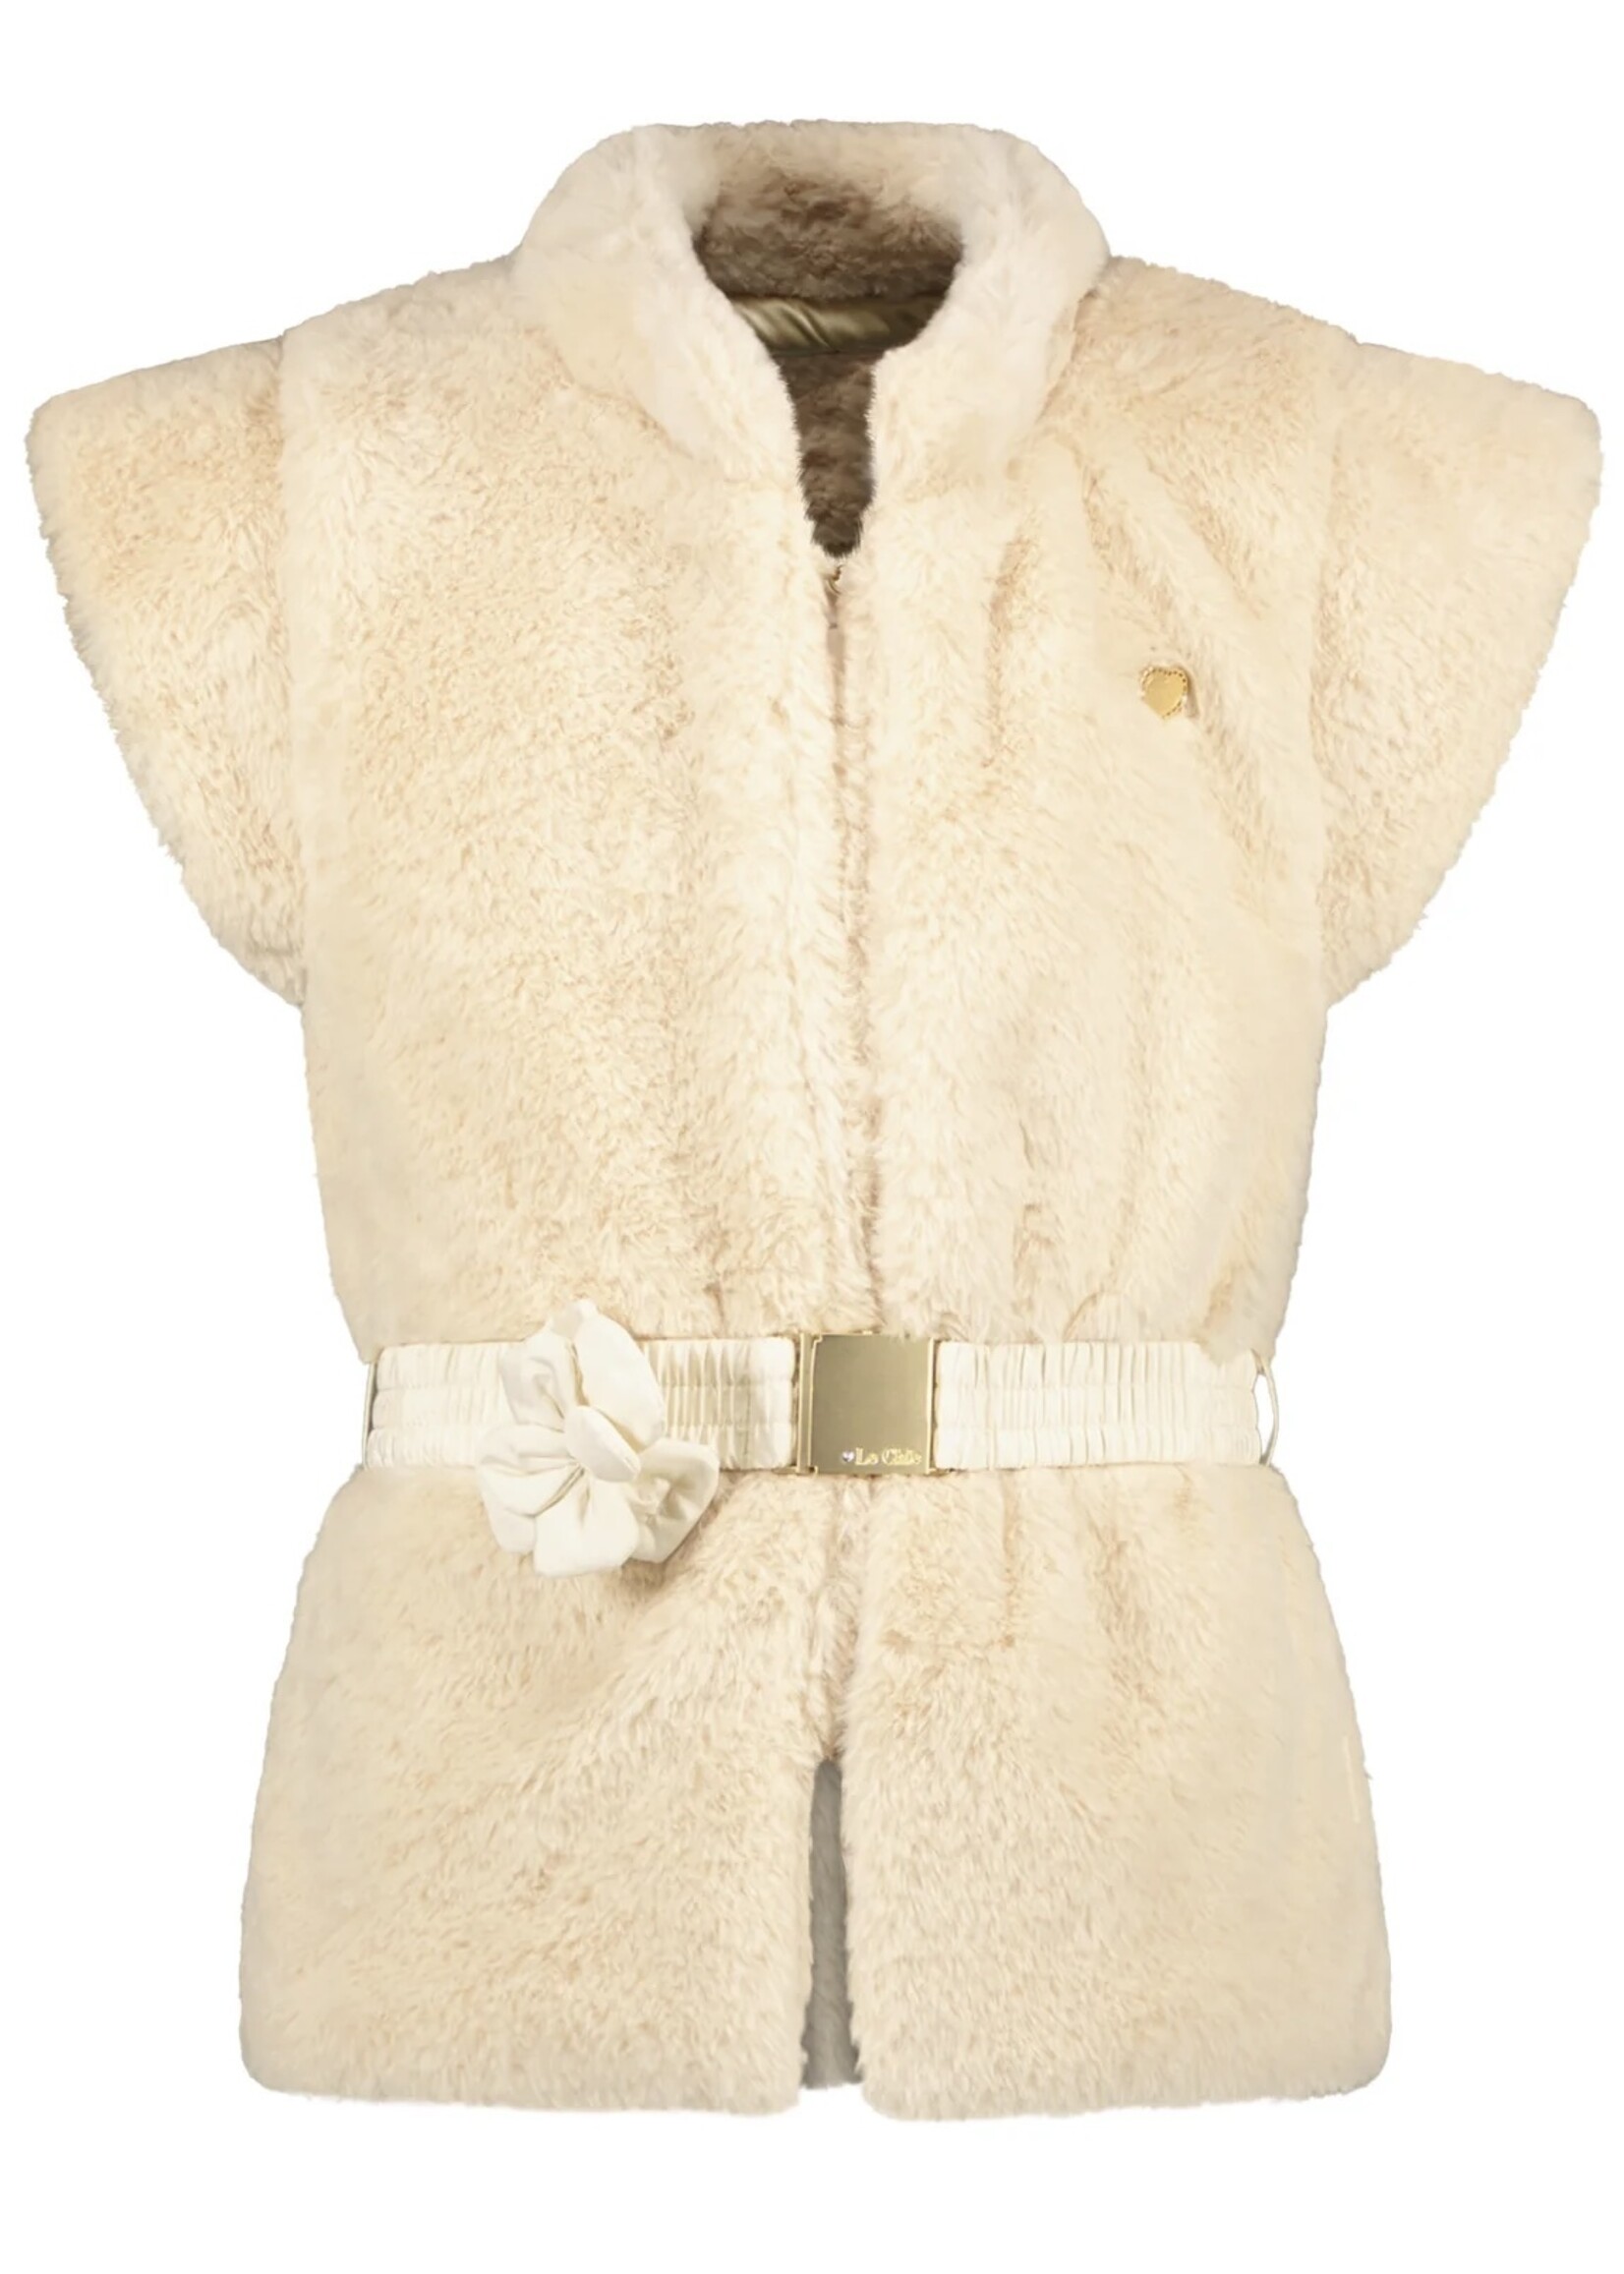 Le Chic LE CHIC C308-5105-008 EMARY GILET PEARLED IVORY